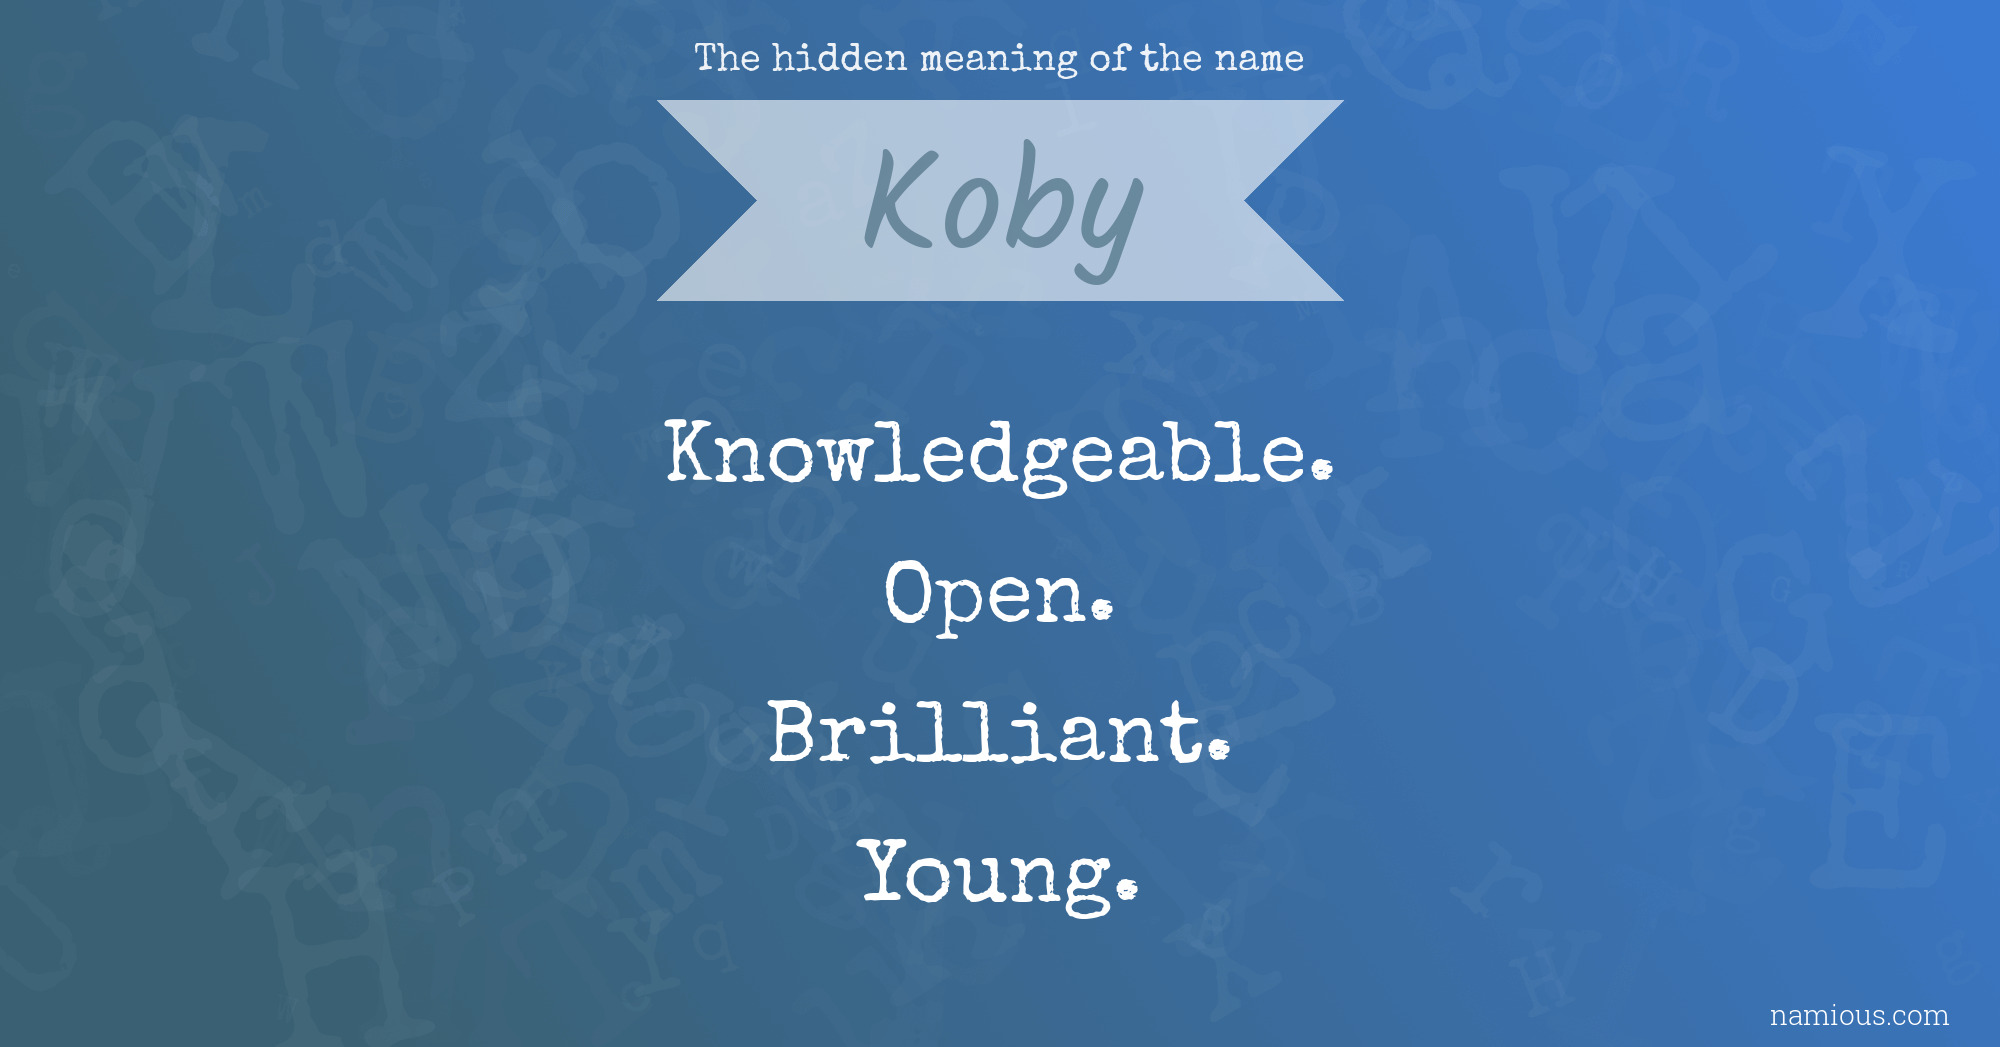 The hidden meaning of the name Koby